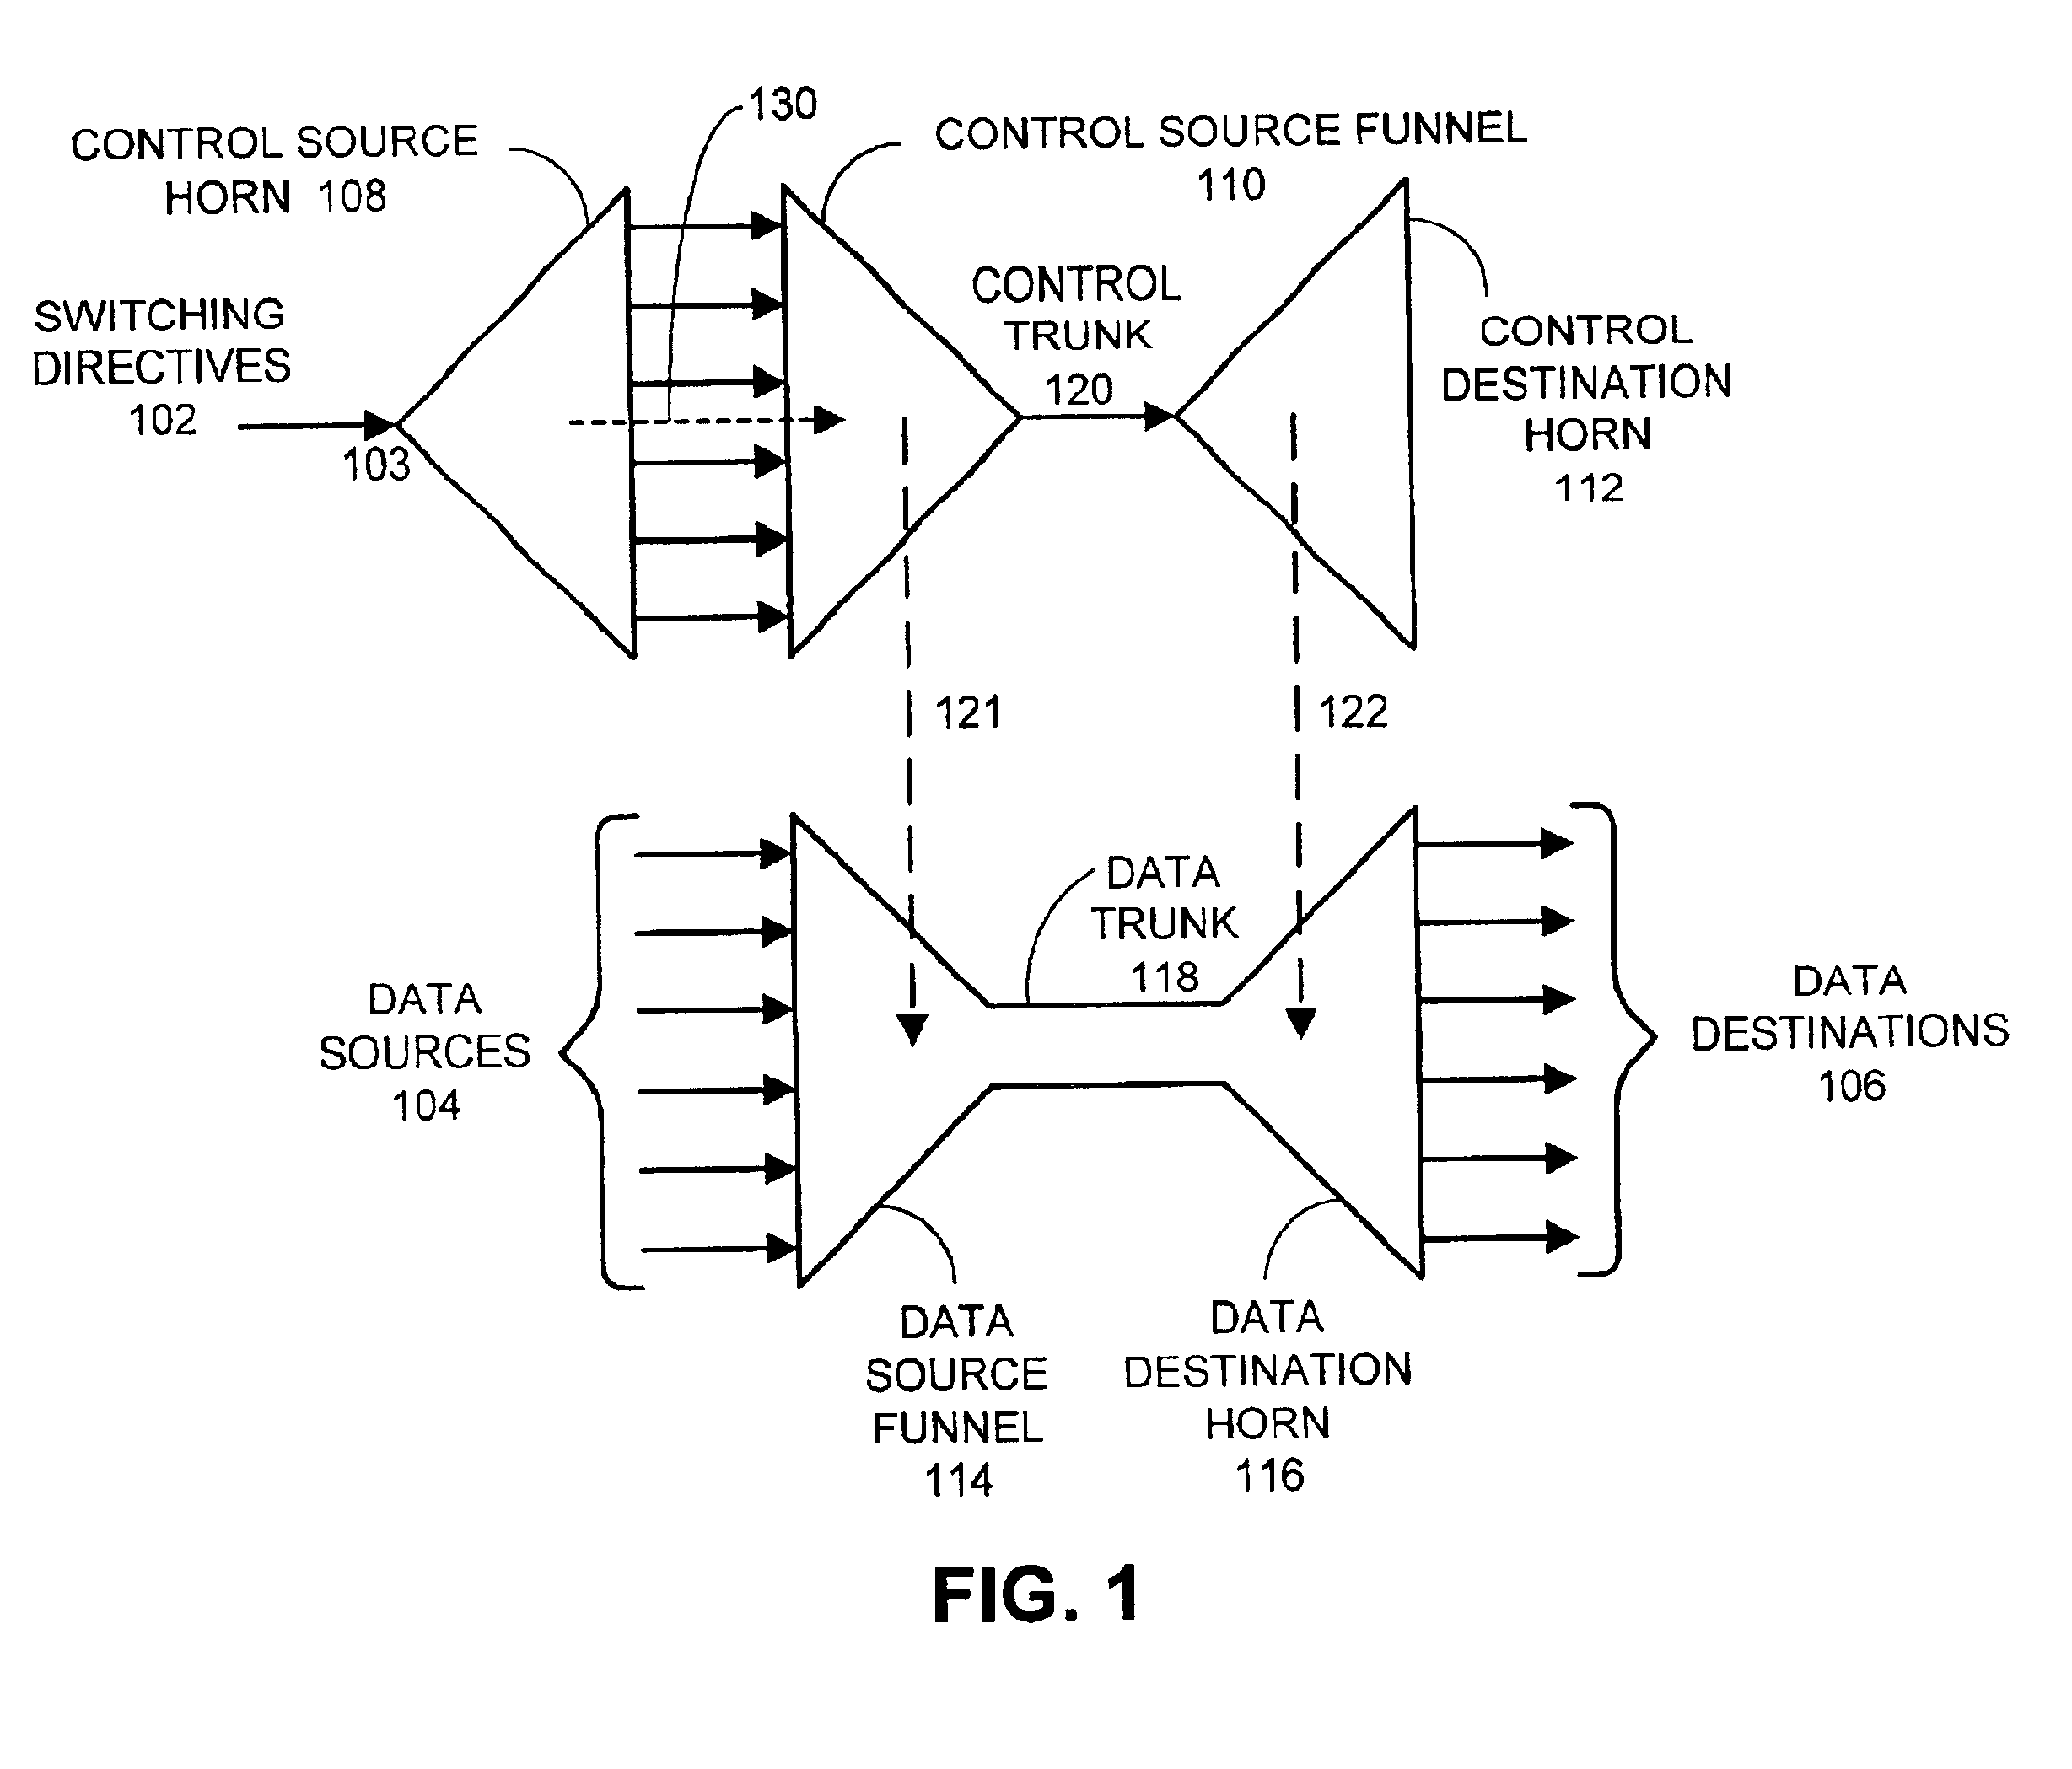 Apparatus and method for sequencing memory operations in an asynchronous switch fabric